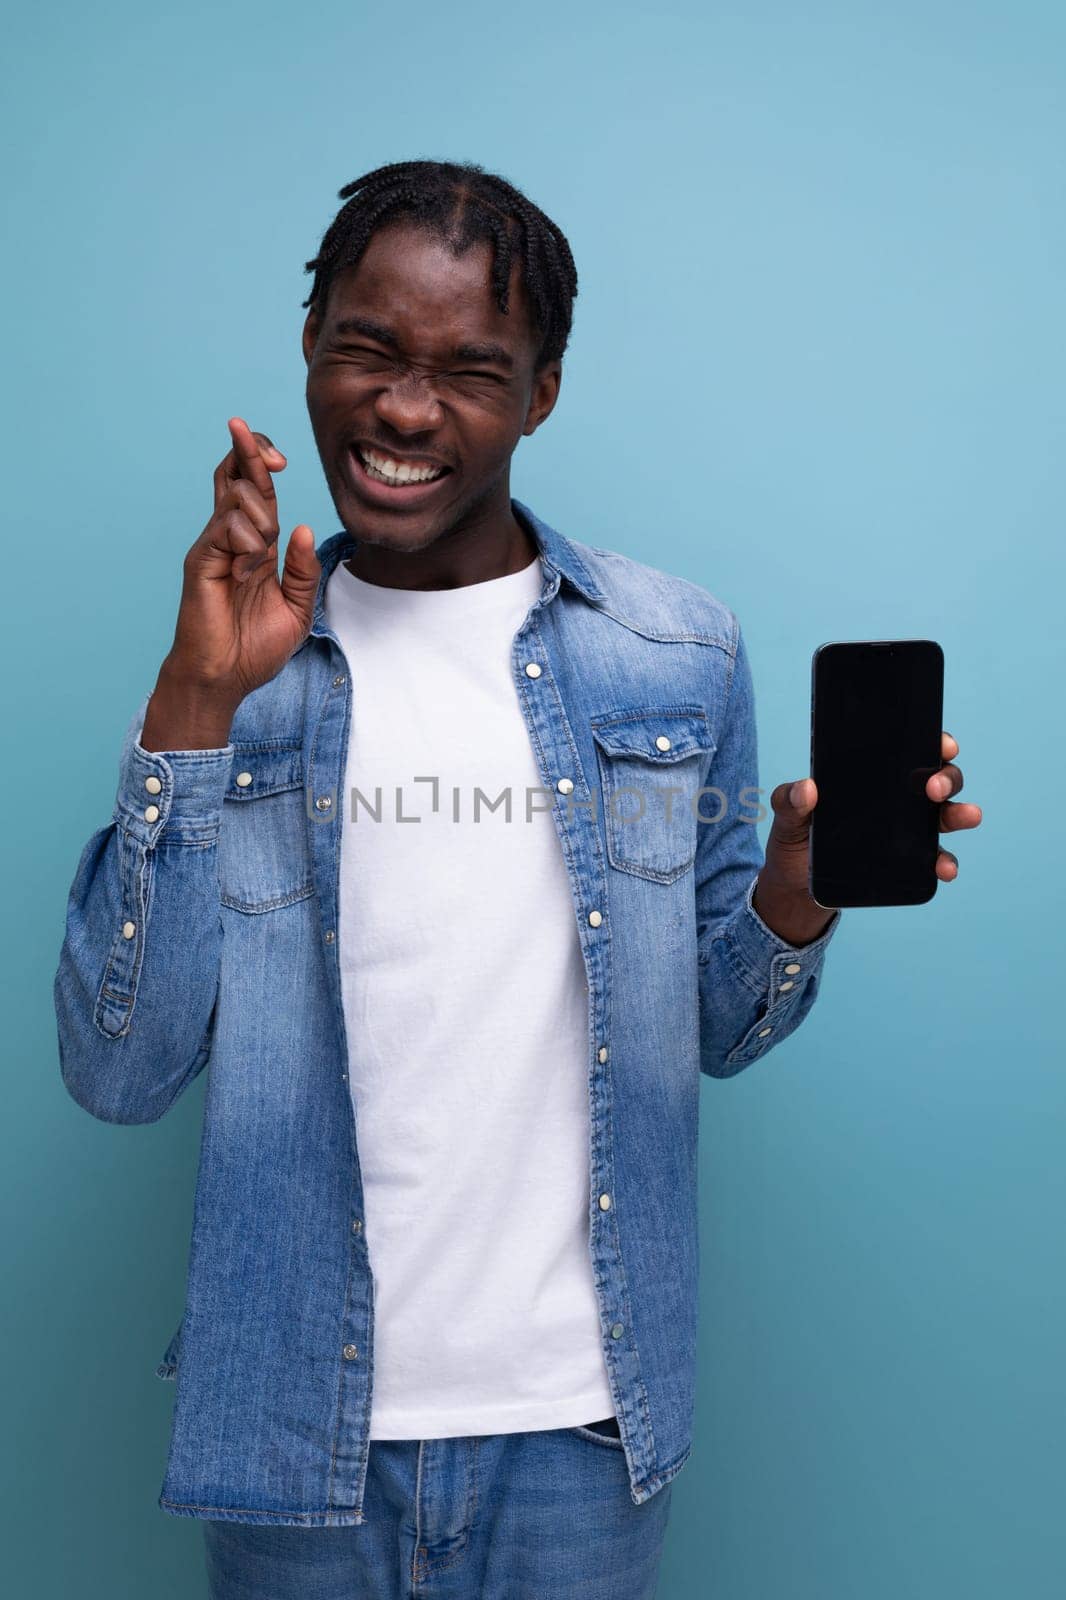 smiling african man with black dreadlocks using smartphone.